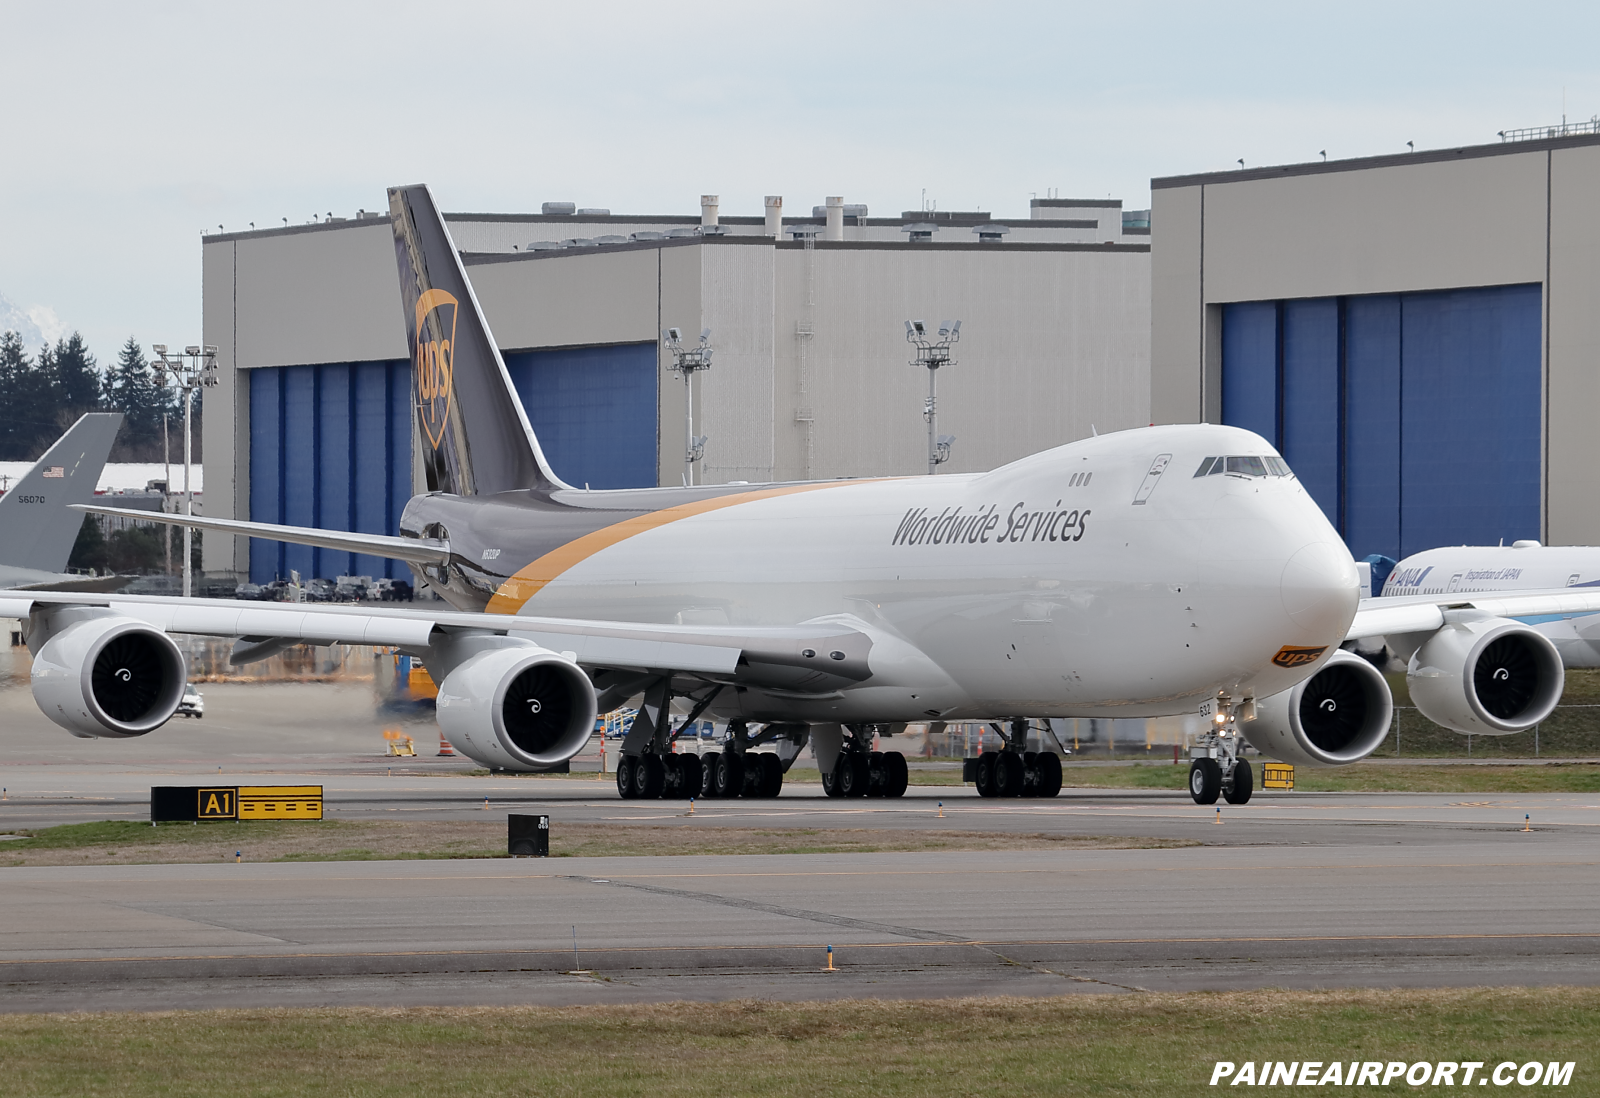 UPS 747-8F N632UP at KPAE Paine Field